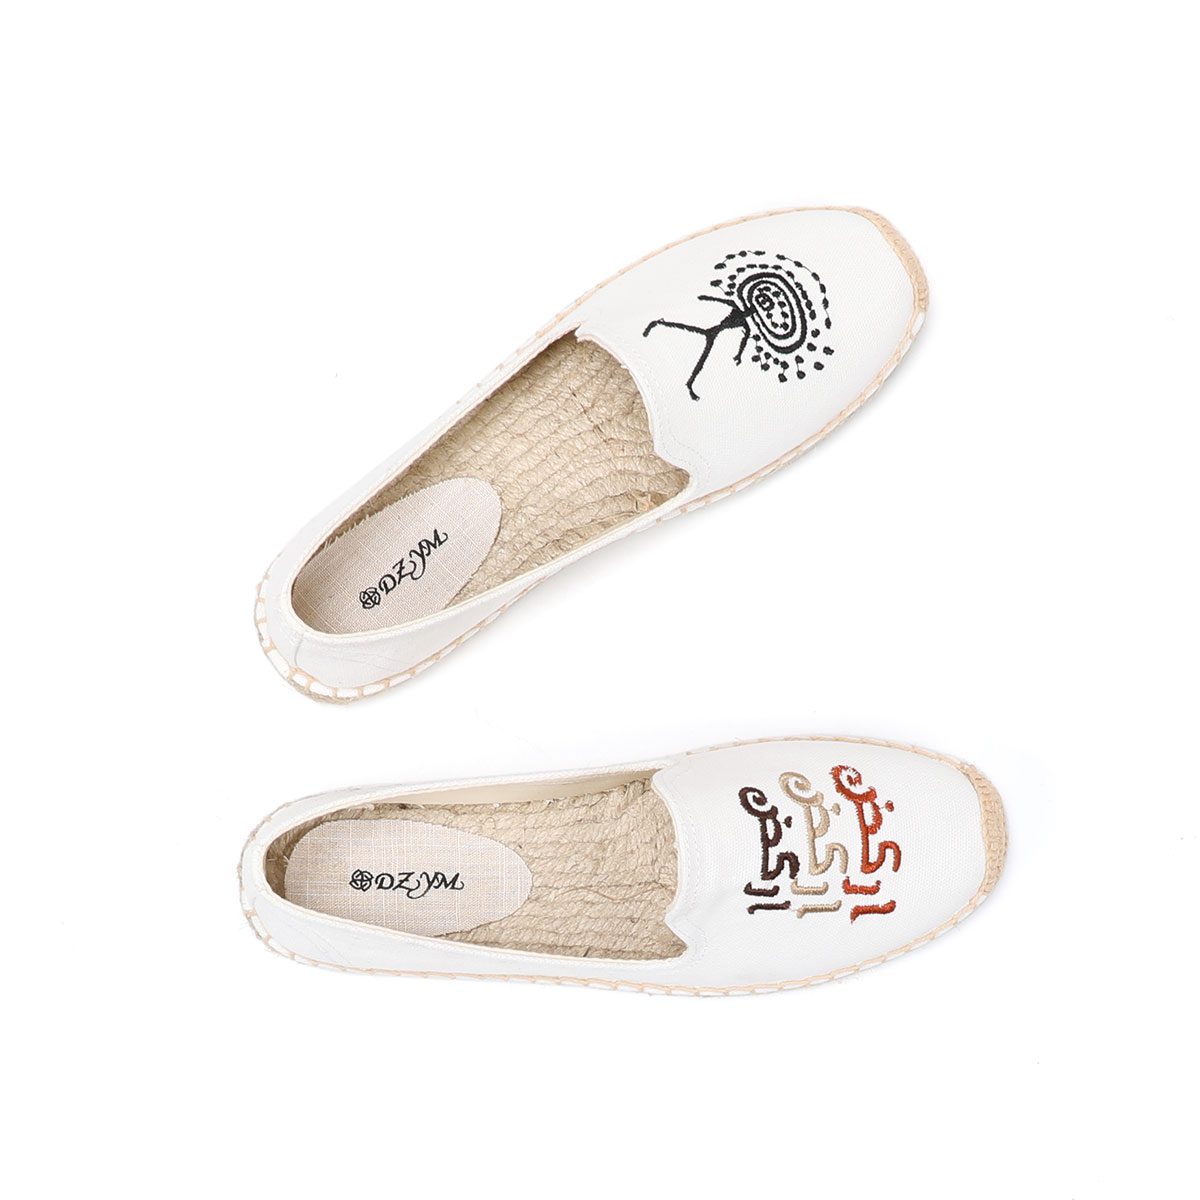 Personality fashion new style flat shoes Personality embroidery non-slip women's flat espadrilles